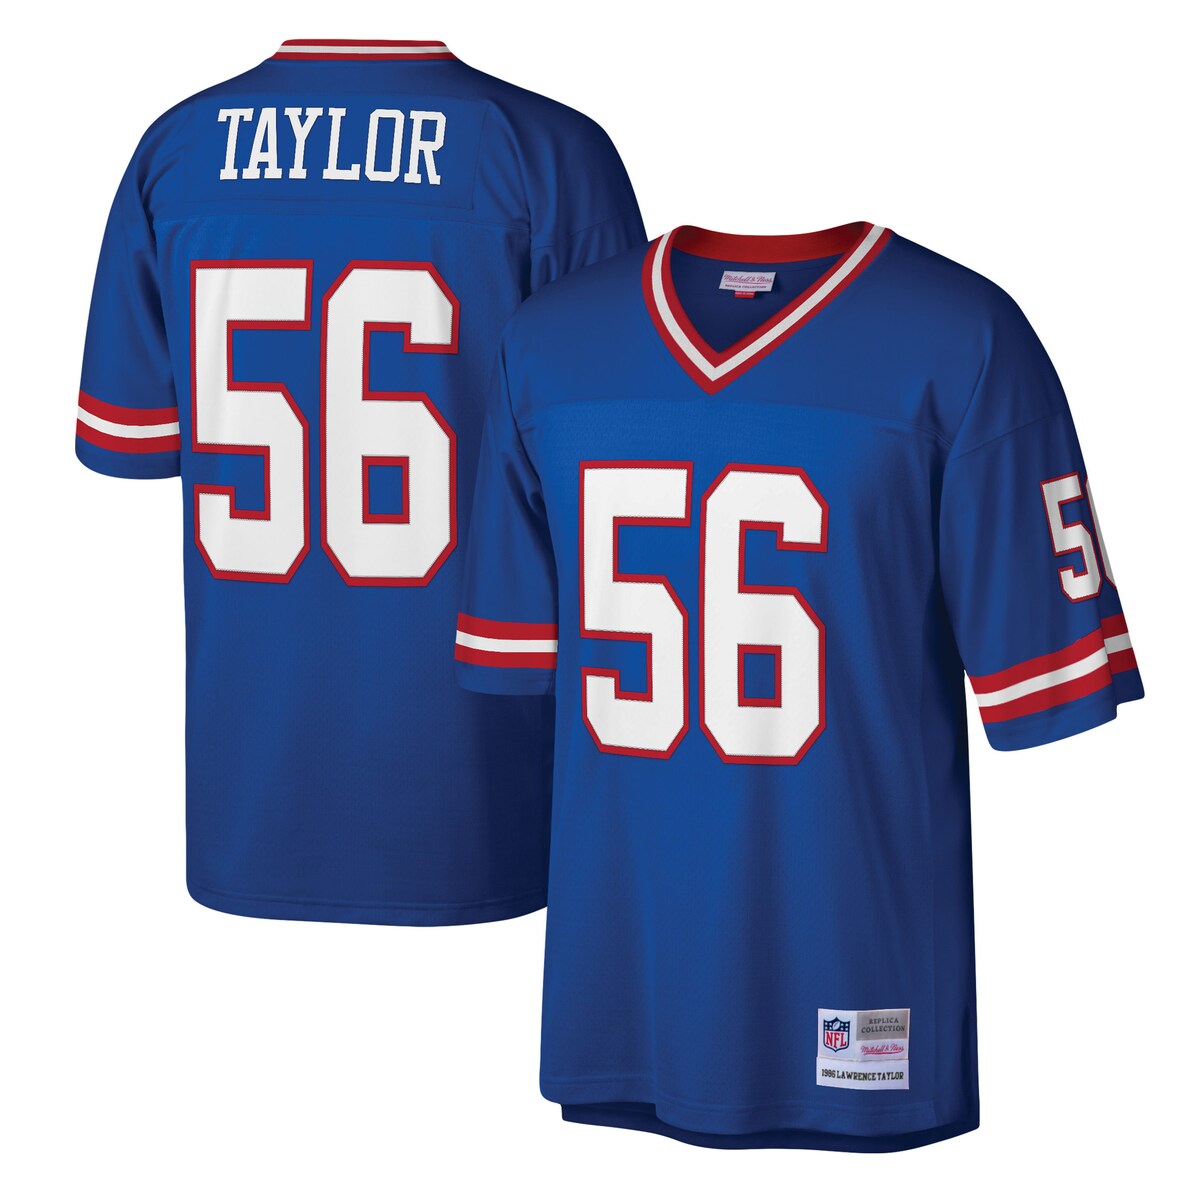 You loved watching Lawrence Taylor control the football field in his prime. Now you can show off your appreciation for his storied career with this New York Giants Legacy Replica jersey from Mitchell & Ness. It features distinctive throwback team graphics on the chest and back, perfect for wearing at home or at the game. By wearing this jersey, you'll feel like you're reliving some of your favorite player's greatest plays from his glory days.Brand: Mitchell & NessOfficially licensedImportedDroptail hem with side slitsMachine wash, line dryTackle twill graphicsScreen print accentsMesh bodiceSizing Tip: Product runs true to size. If you are in between sizes, we recommend ordering the smaller size.Material: 100% PolyesterRib-knit v-neck collarWoven tags at bottom hem